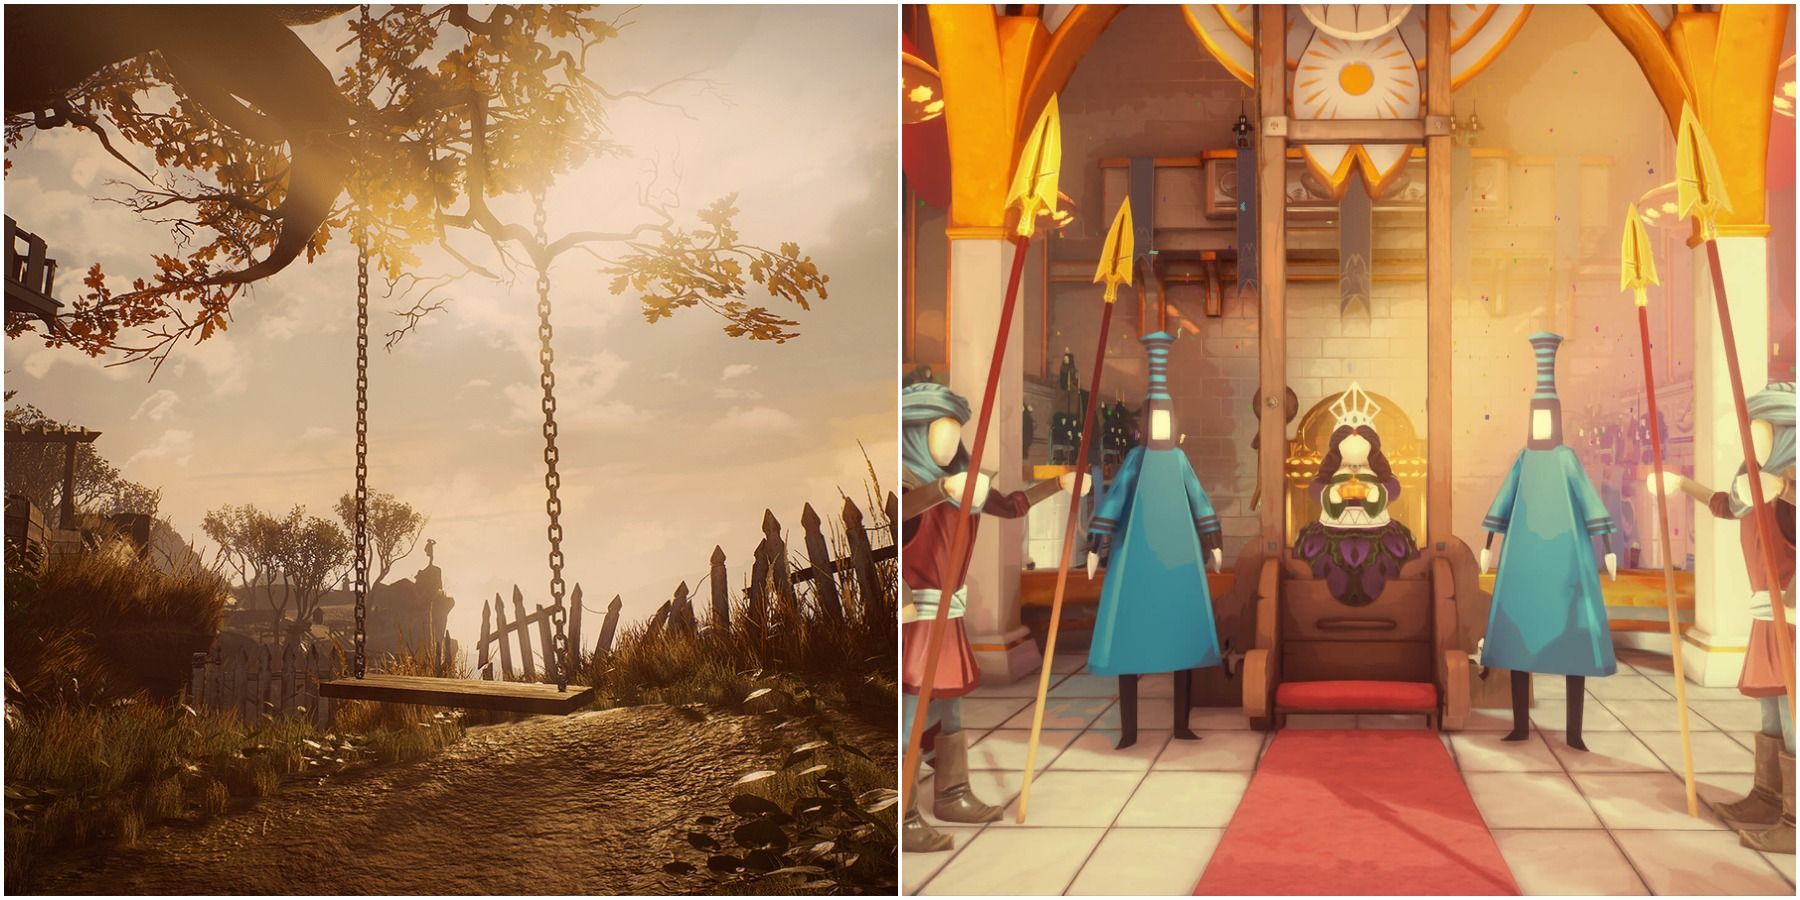 Split image of empty swing and queen with crown.